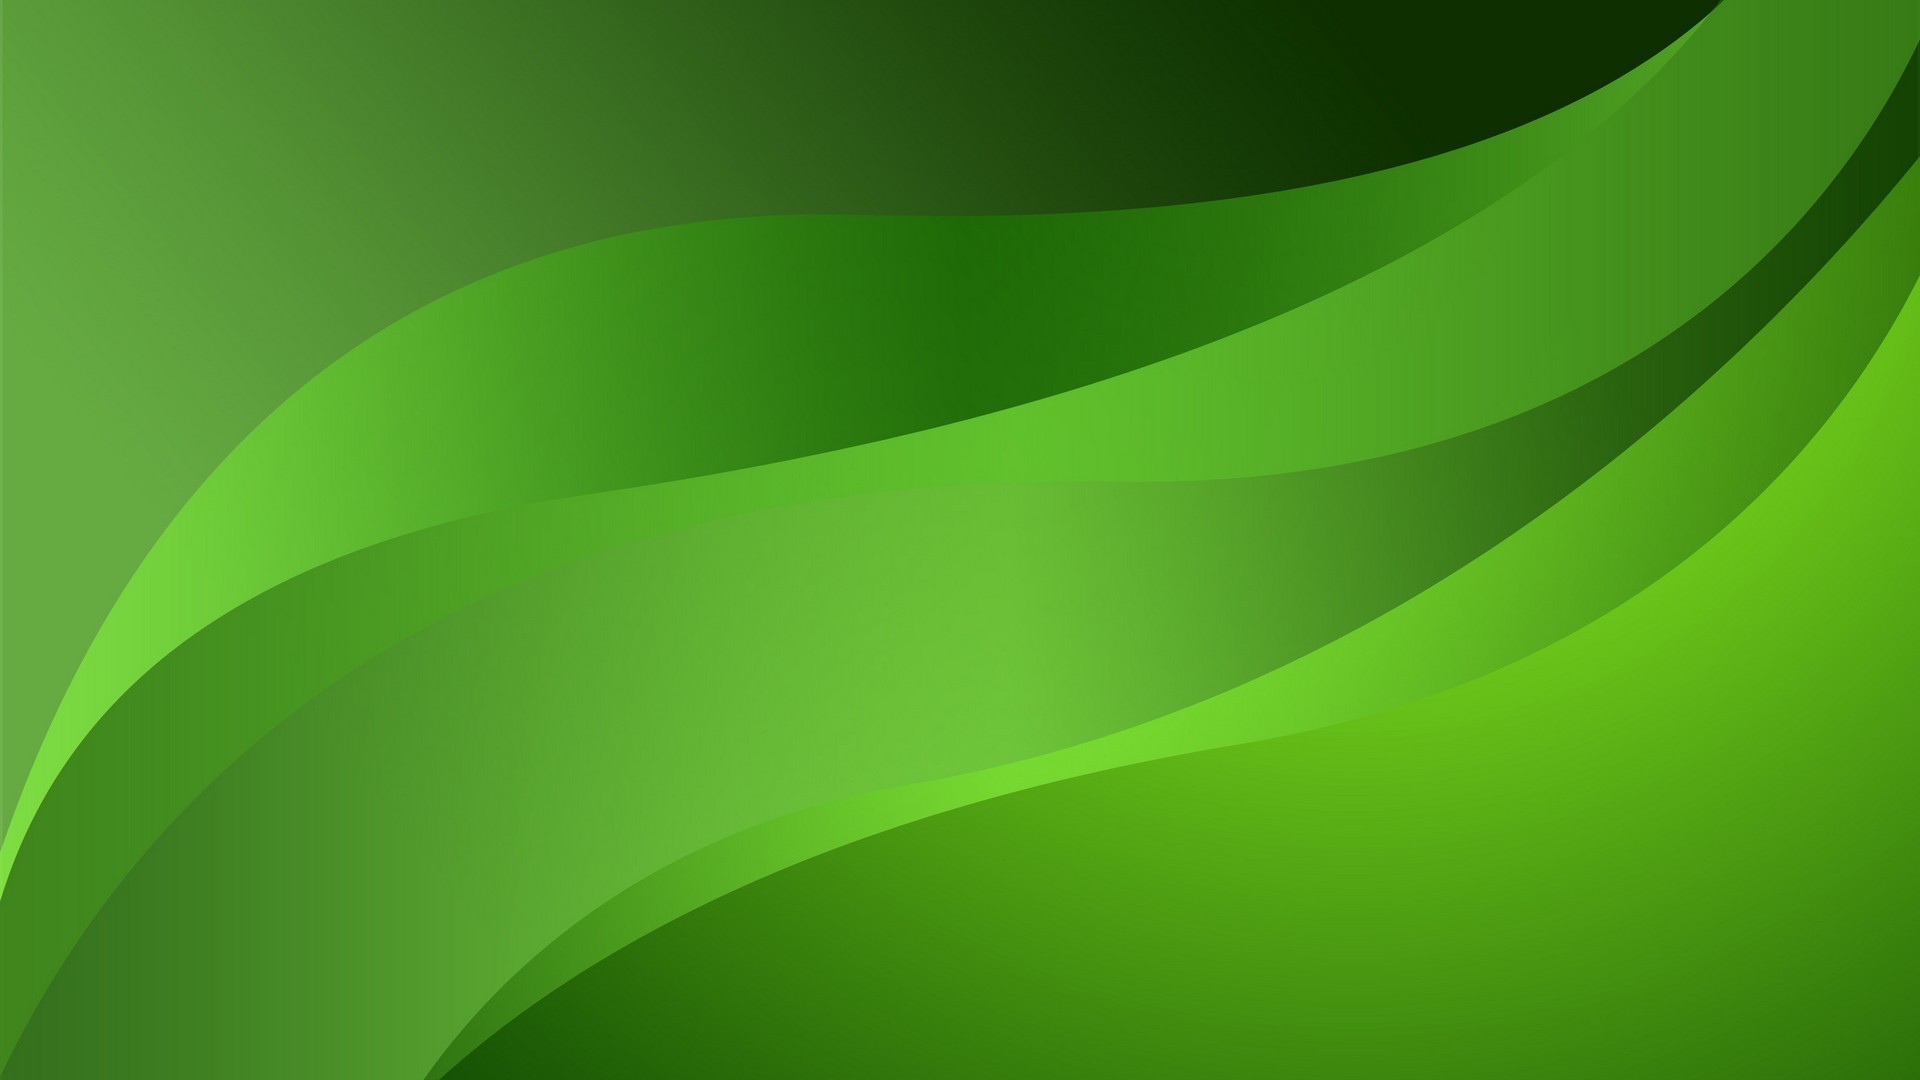 Wallpapers Computer Green Colour with image resolution 1920x1080 pixel. You can make this wallpaper for your Desktop Computer Backgrounds, Mac Wallpapers, Android Lock screen or iPhone Screensavers